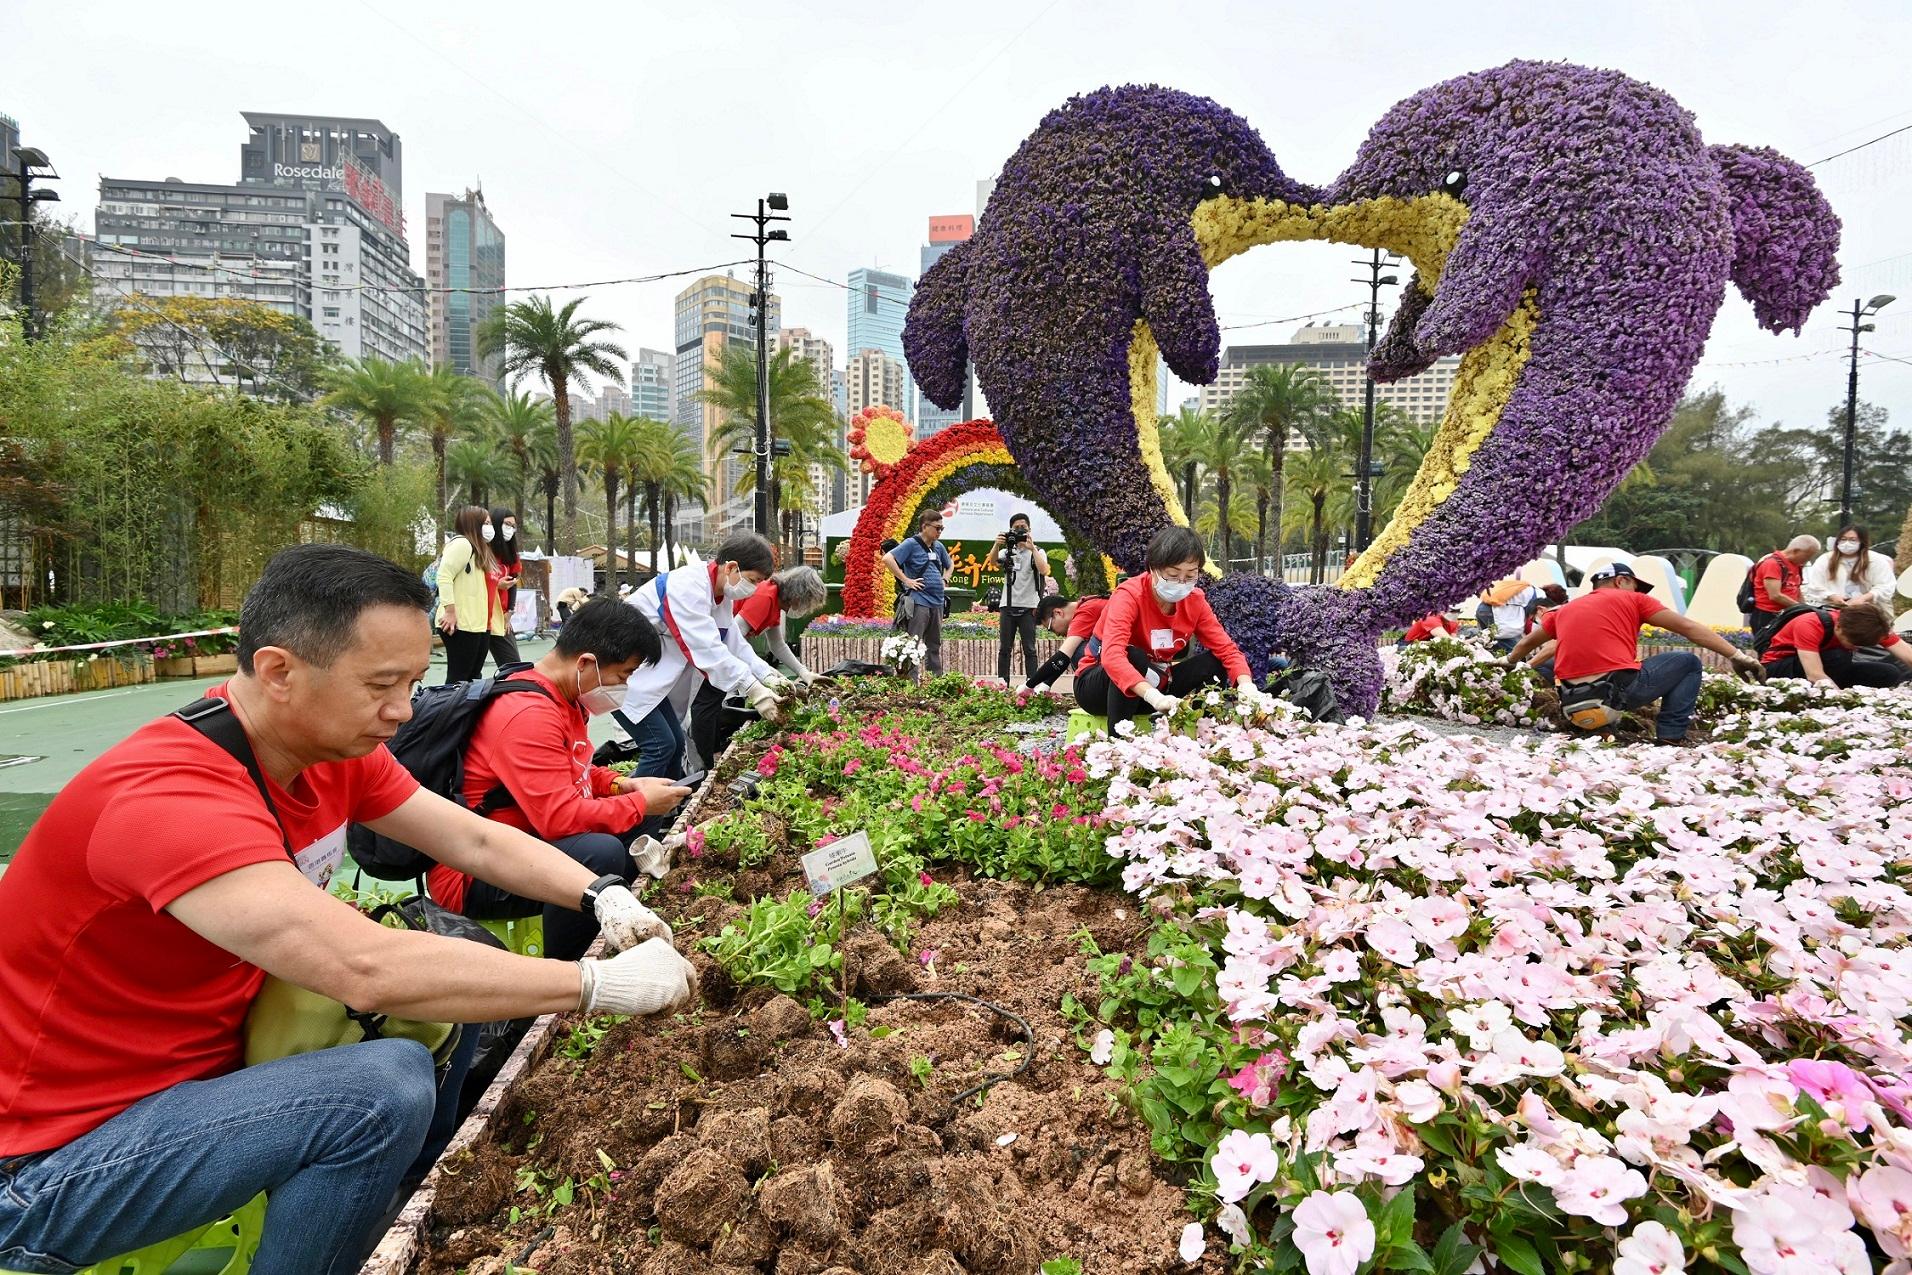 The Green Recycling Day activities for the Hong Kong Flower Show organised by the Leisure and Cultural Services Department were held today (March 20) and will continue tomorrow (March 21) to reinforce green measures and reduce waste, reflecting the department's commitment to implementing green measures for environmental protection in its large-scale events. Photo shows volunteers assisting in separating and collecting flowers at the showground for waste reduction.